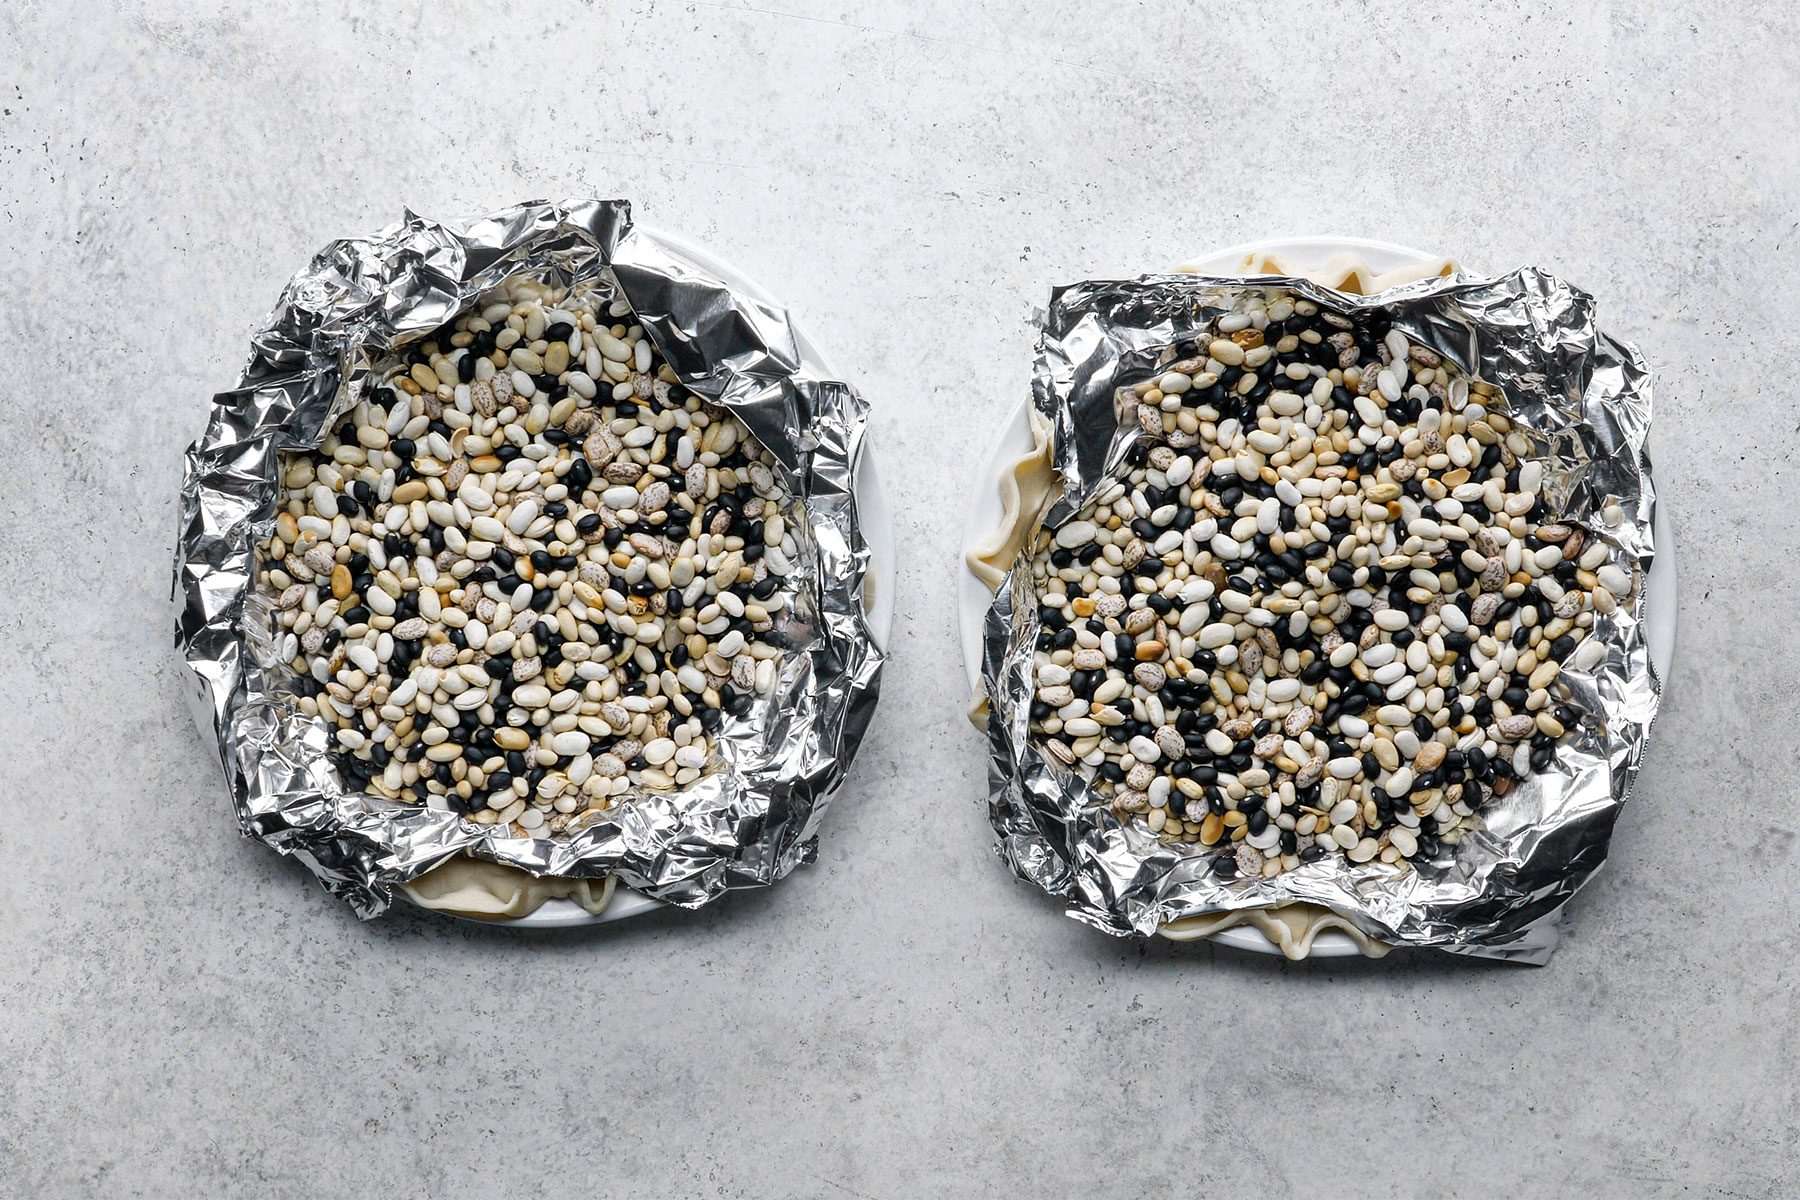 Foil filled with beans used as weights